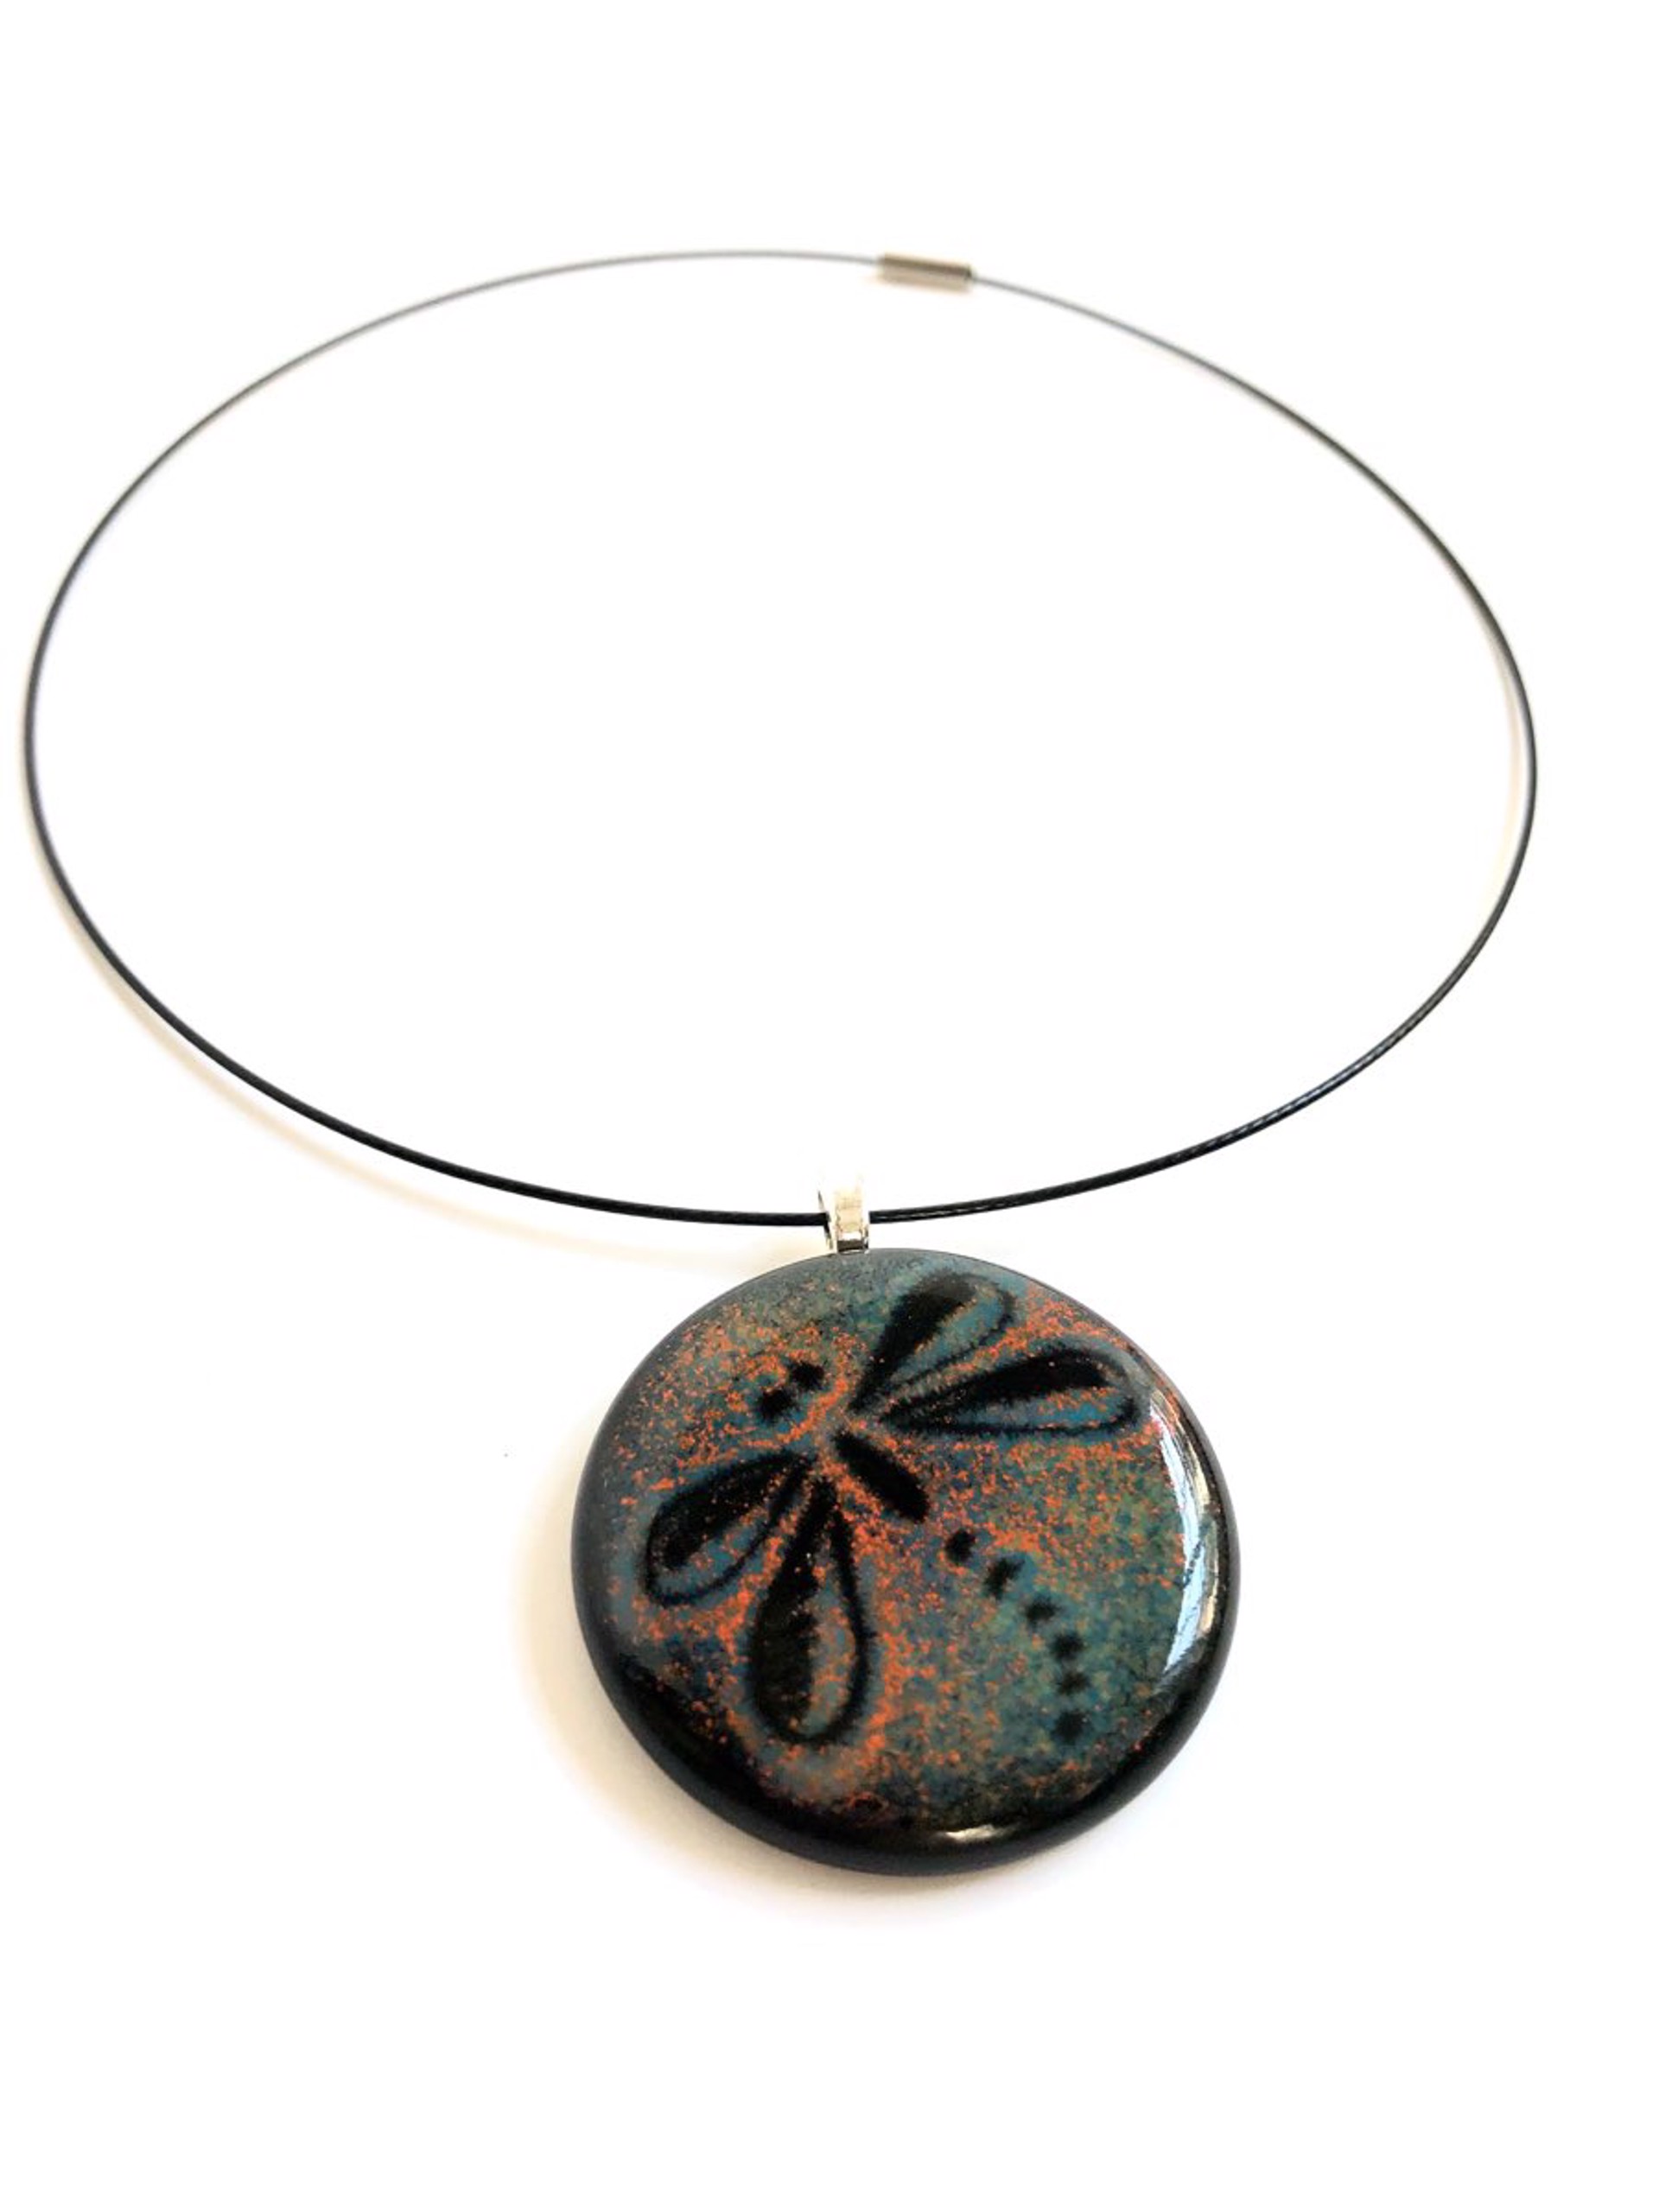 Pendant with Cable by Steve Smith